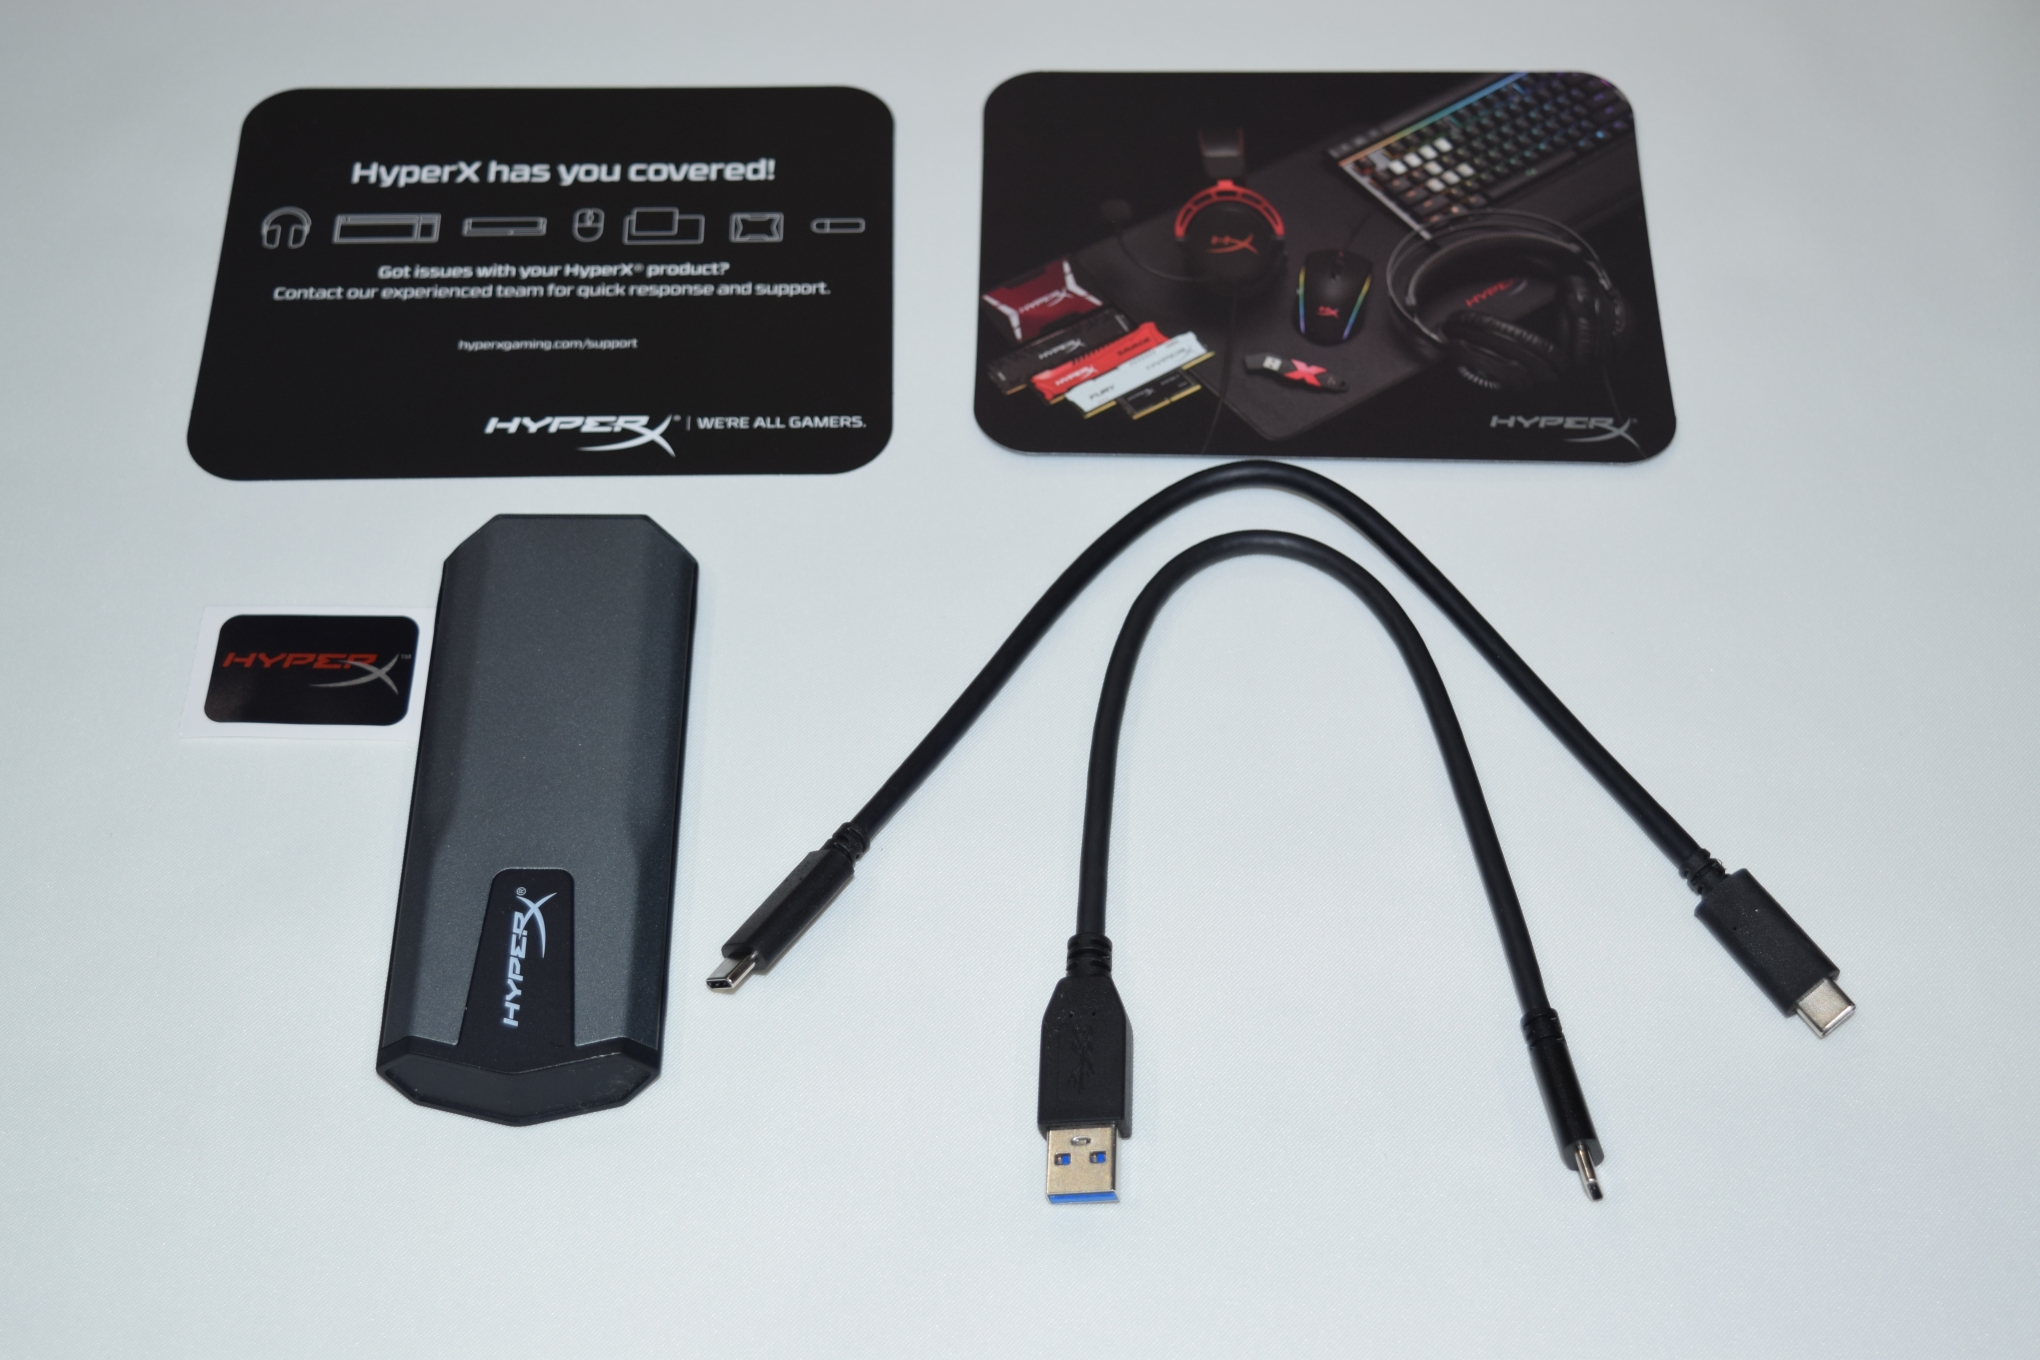 Rarely Hinder meaning Kingston HyperX Savage EXO External SSD Capsule Review